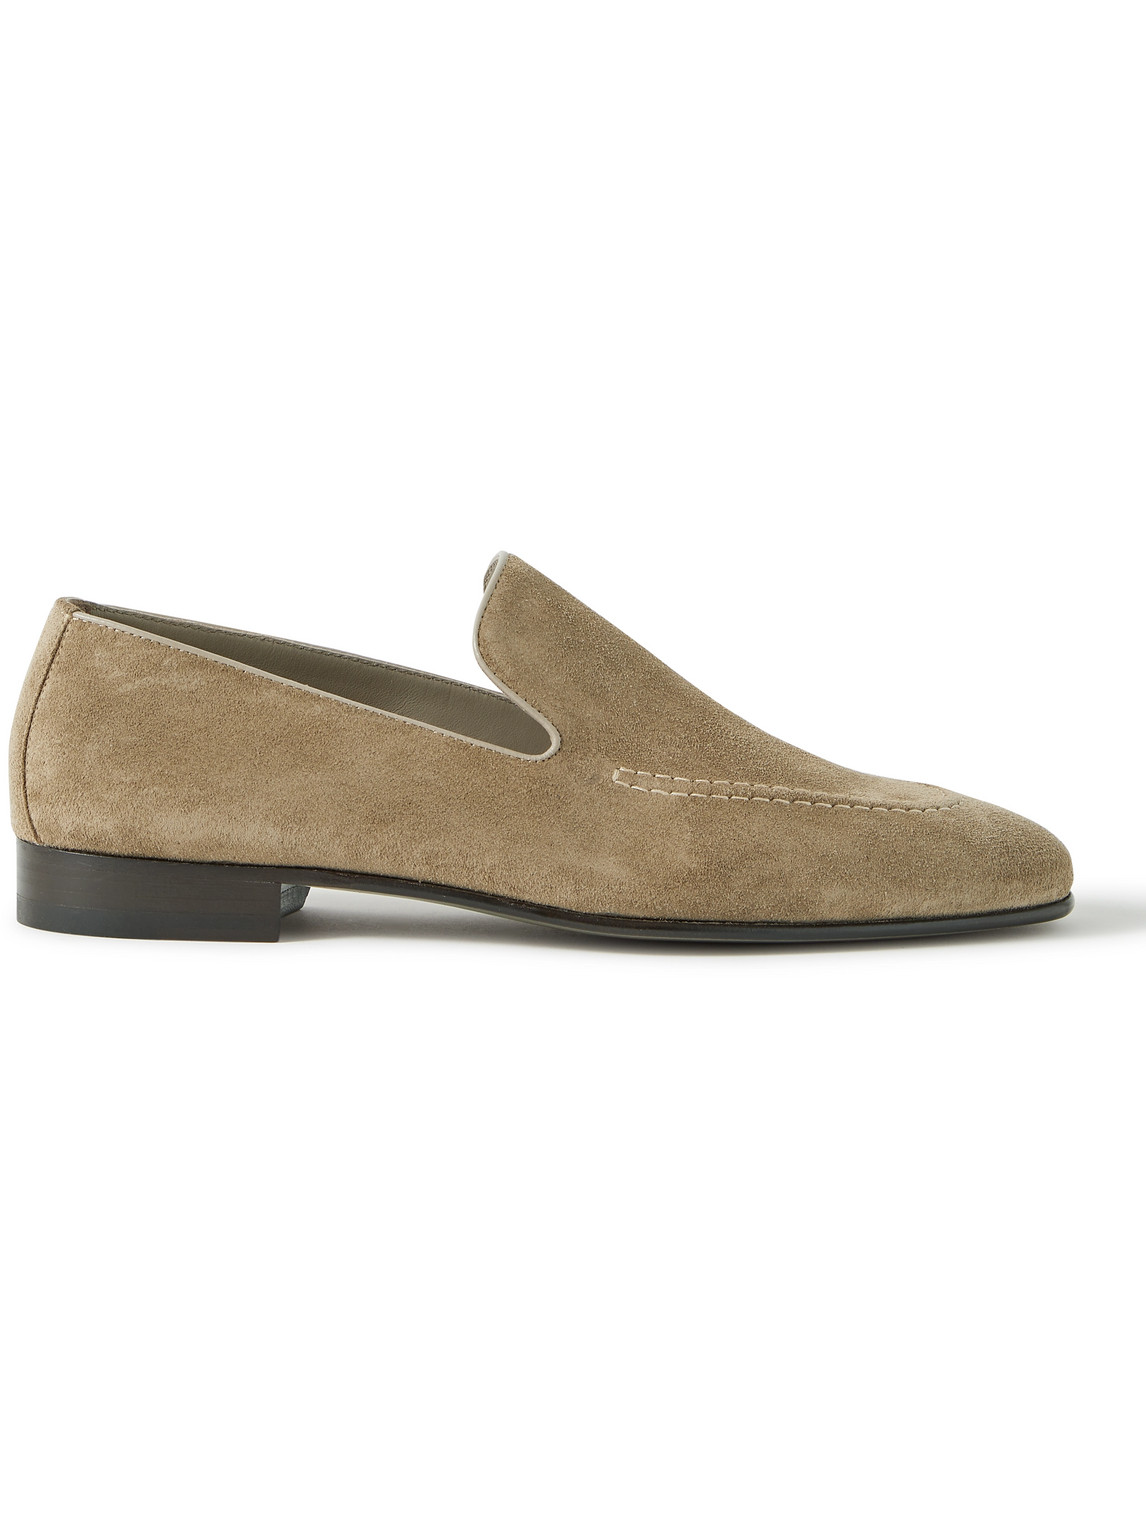 MANOLO BLAHNIK TRURO LEATHER-TRIMMED SUEDE LOAFERS